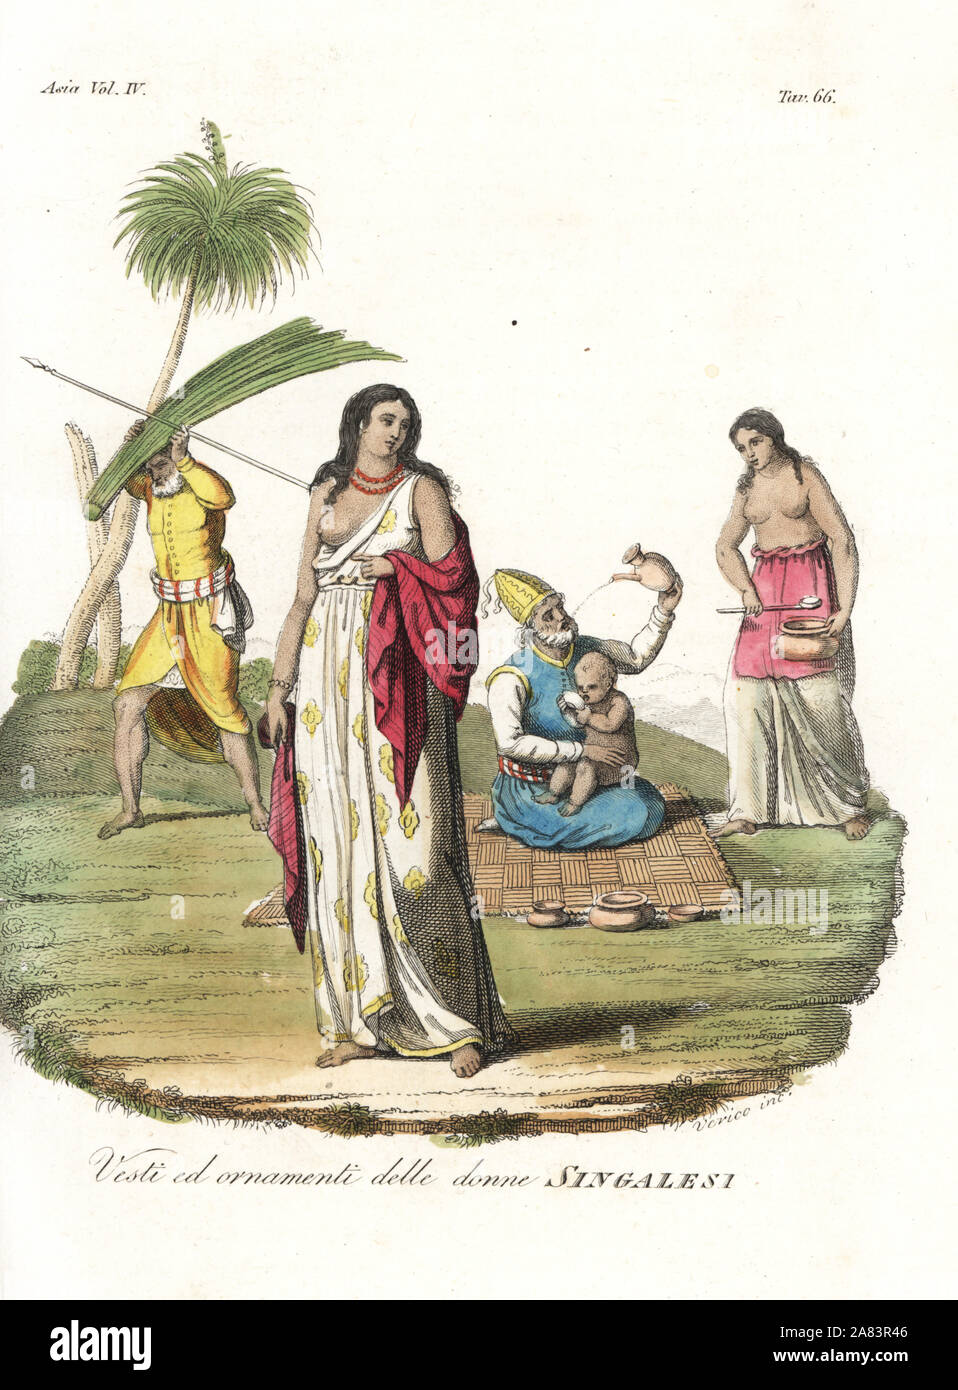 Costume of a Singhalese woman in Sri Lanka. A man sheltering from the rain under a talipot palm leaf and a seated man drinking from a vase. Handcoloured copperplate drawn and engraved by Andrea Bernieri after Robert Knox from Giulio Ferrario's Ancient and Modern Costumes of all the Peoples of the World, Florence, Italy, 1844. Stock Photo